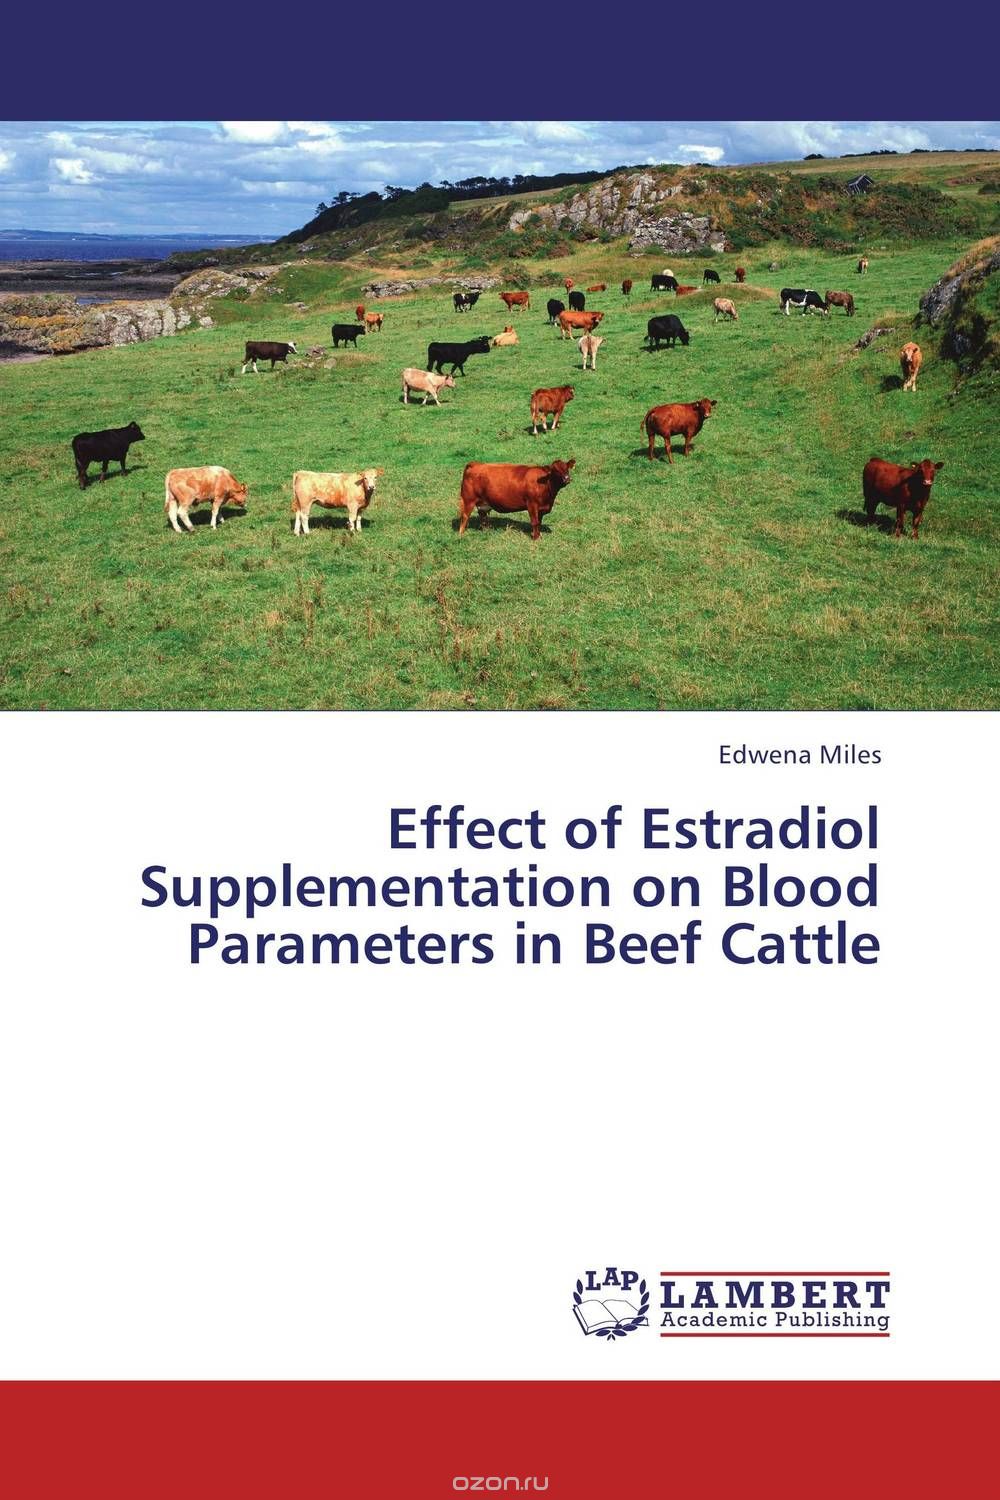 Effect of Estradiol Supplementation on Blood Parameters in Beef Cattle